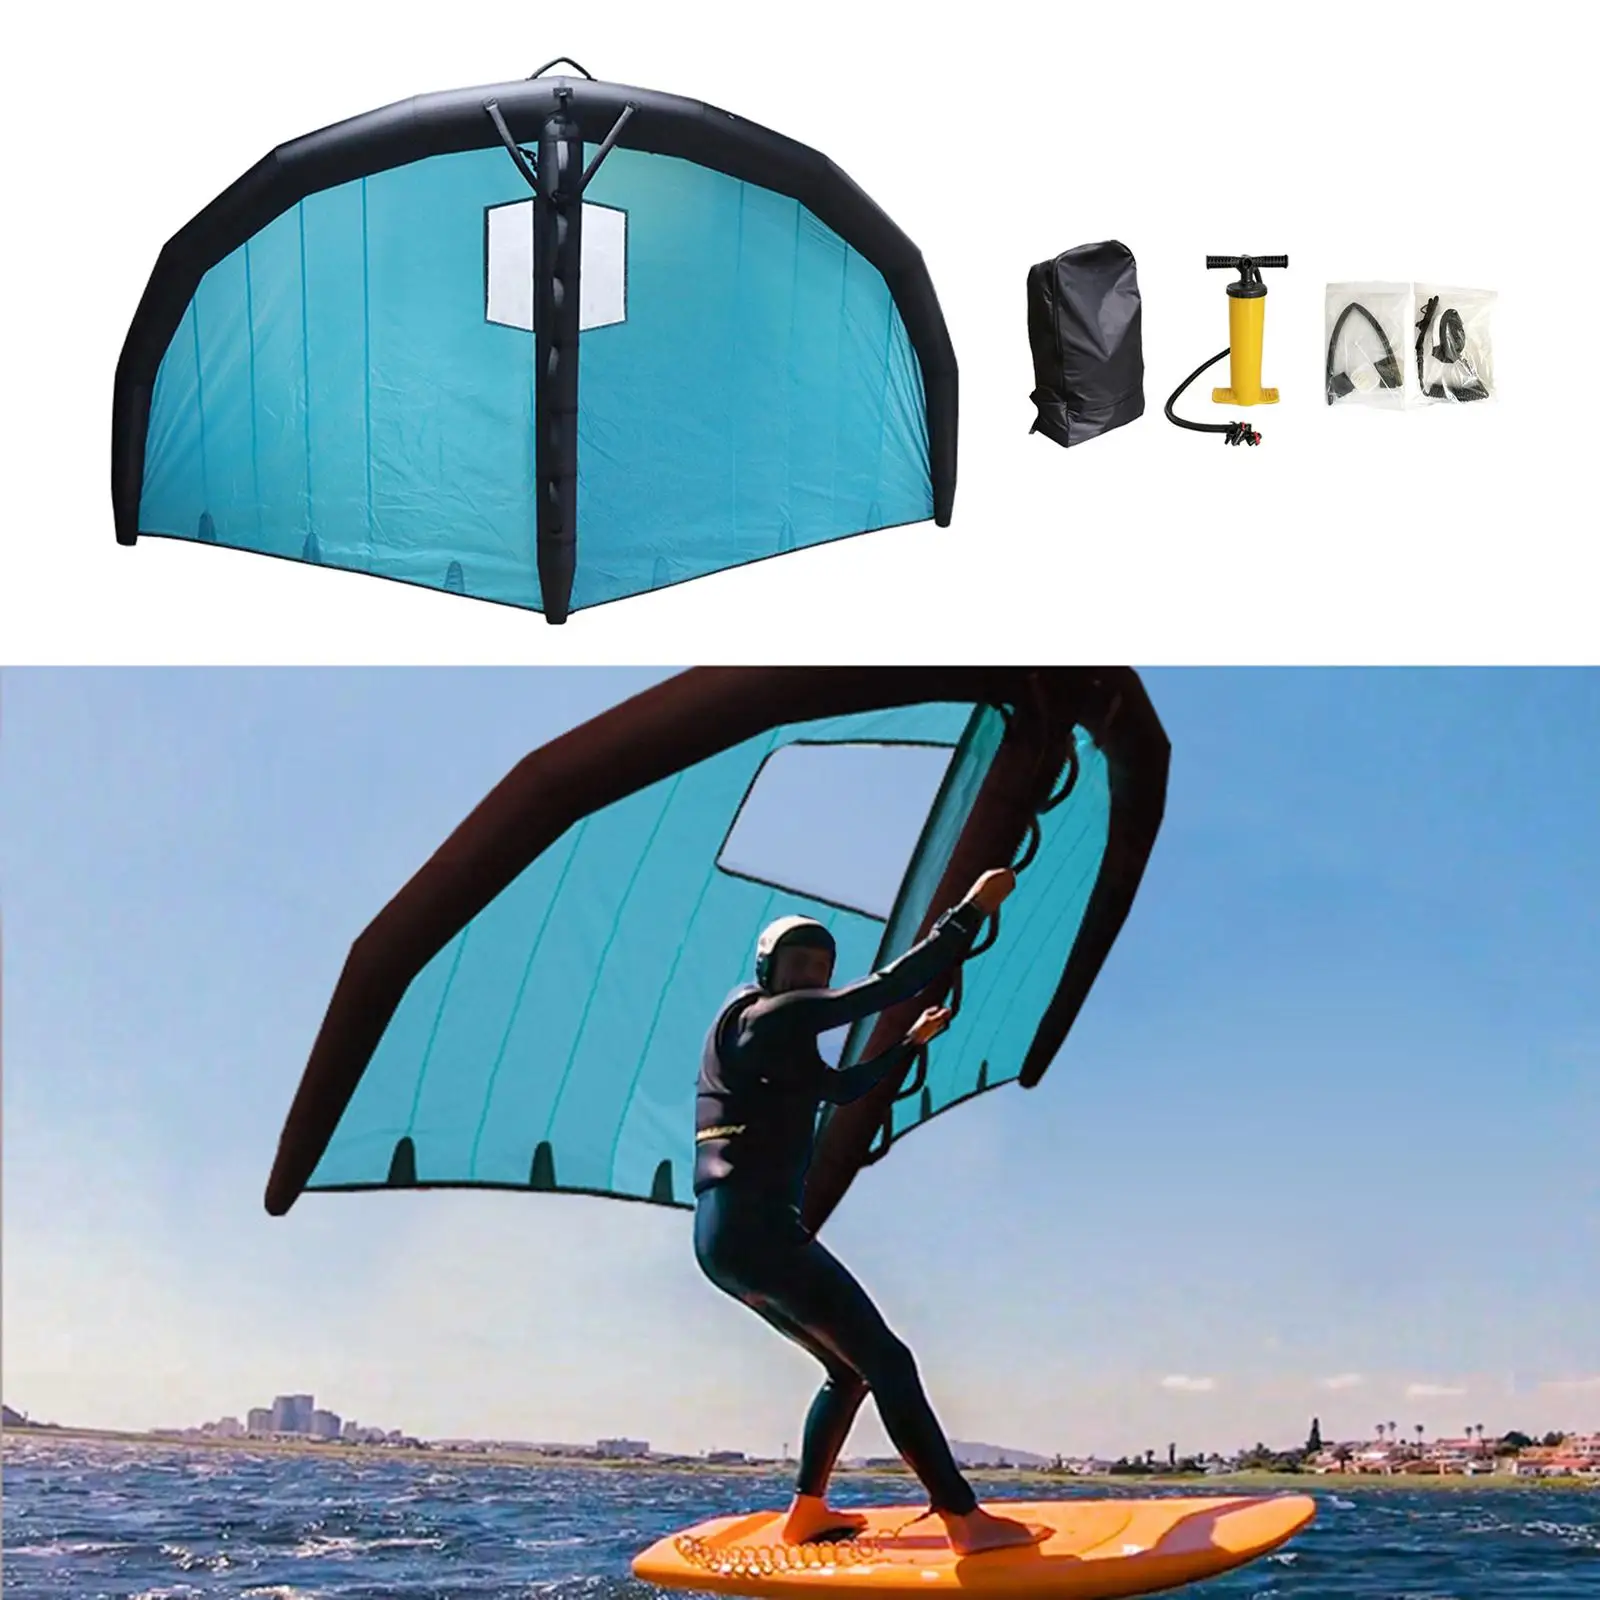 Inflatable Foil Powerful Hydrofoil Surfing Wing for Surfing Ski Windsurfing